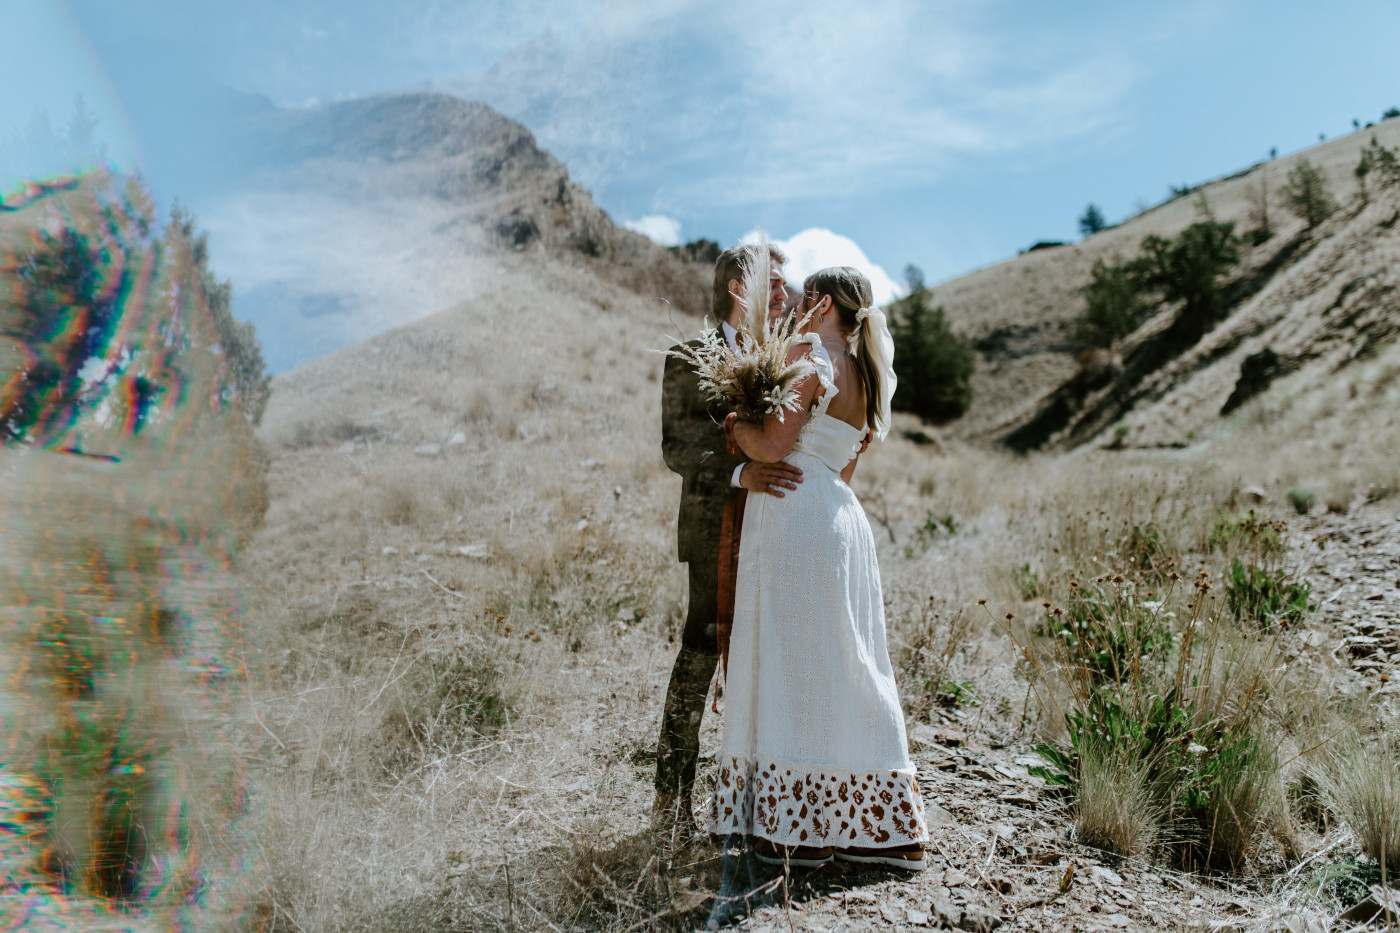 Emily and Greyson kiss. Elopement photography in the Central Oregon desert by Sienna Plus Josh.